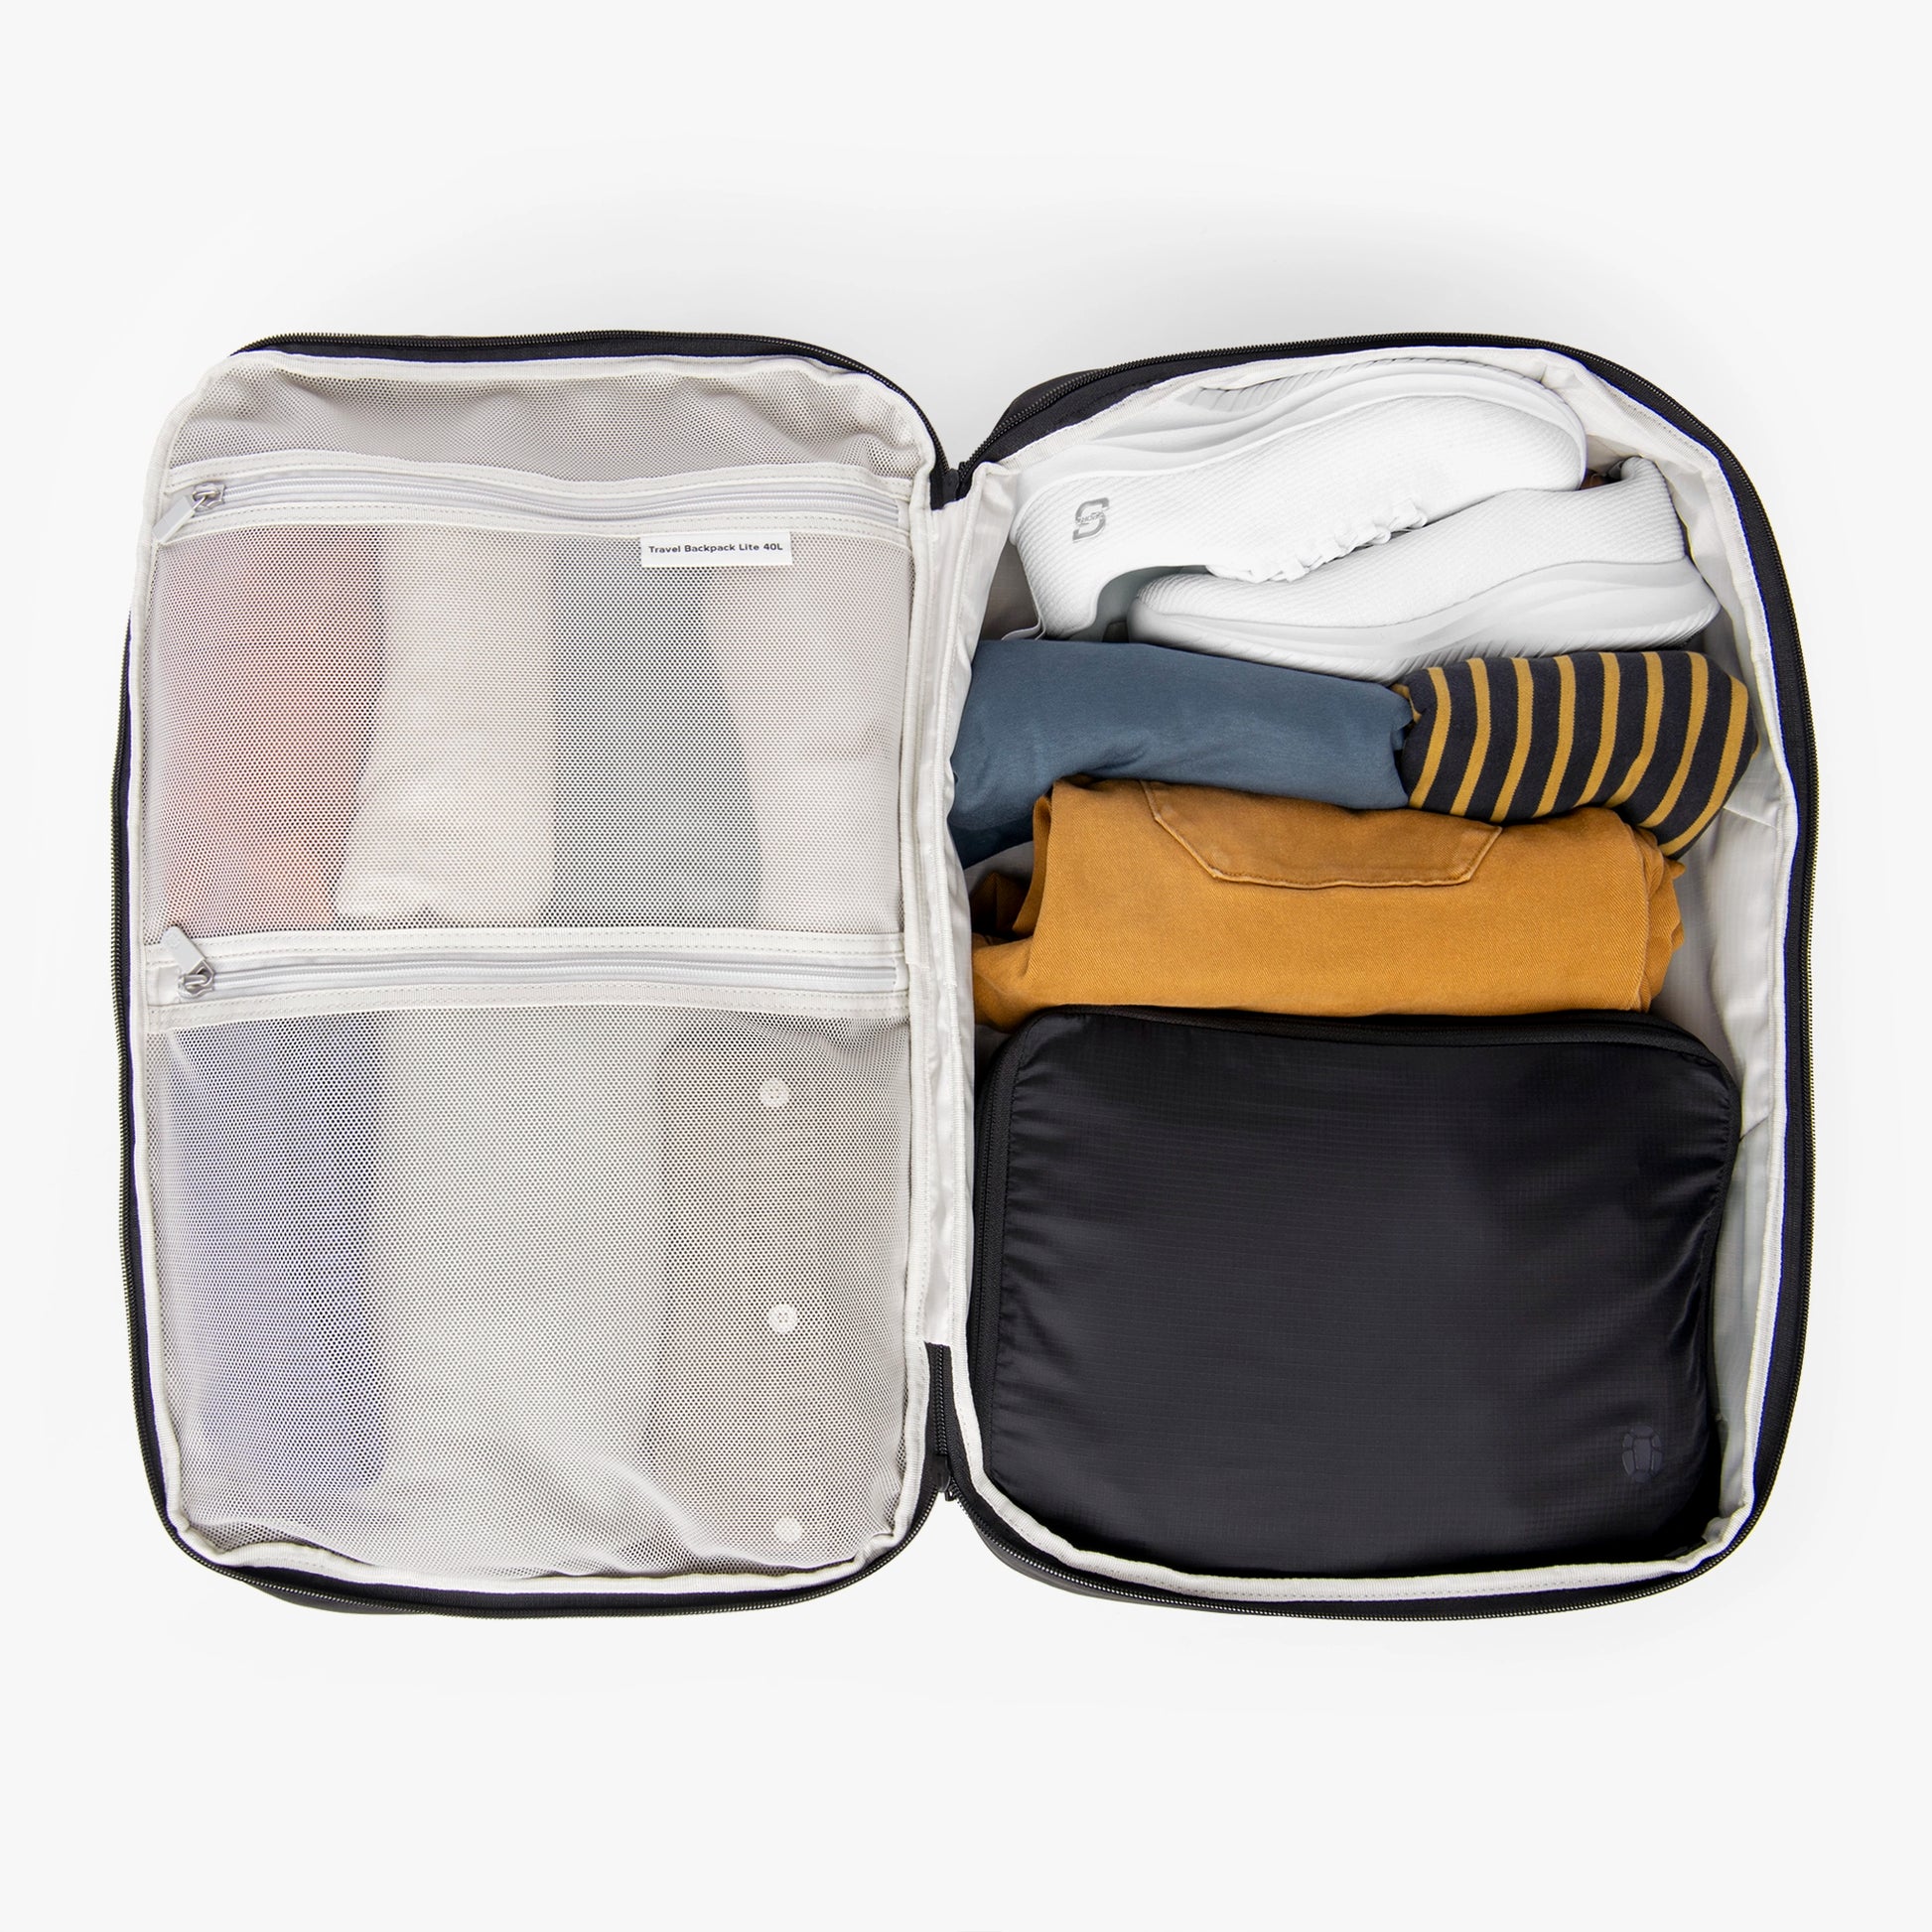 Packs like a suitcase to keep your stuff organized